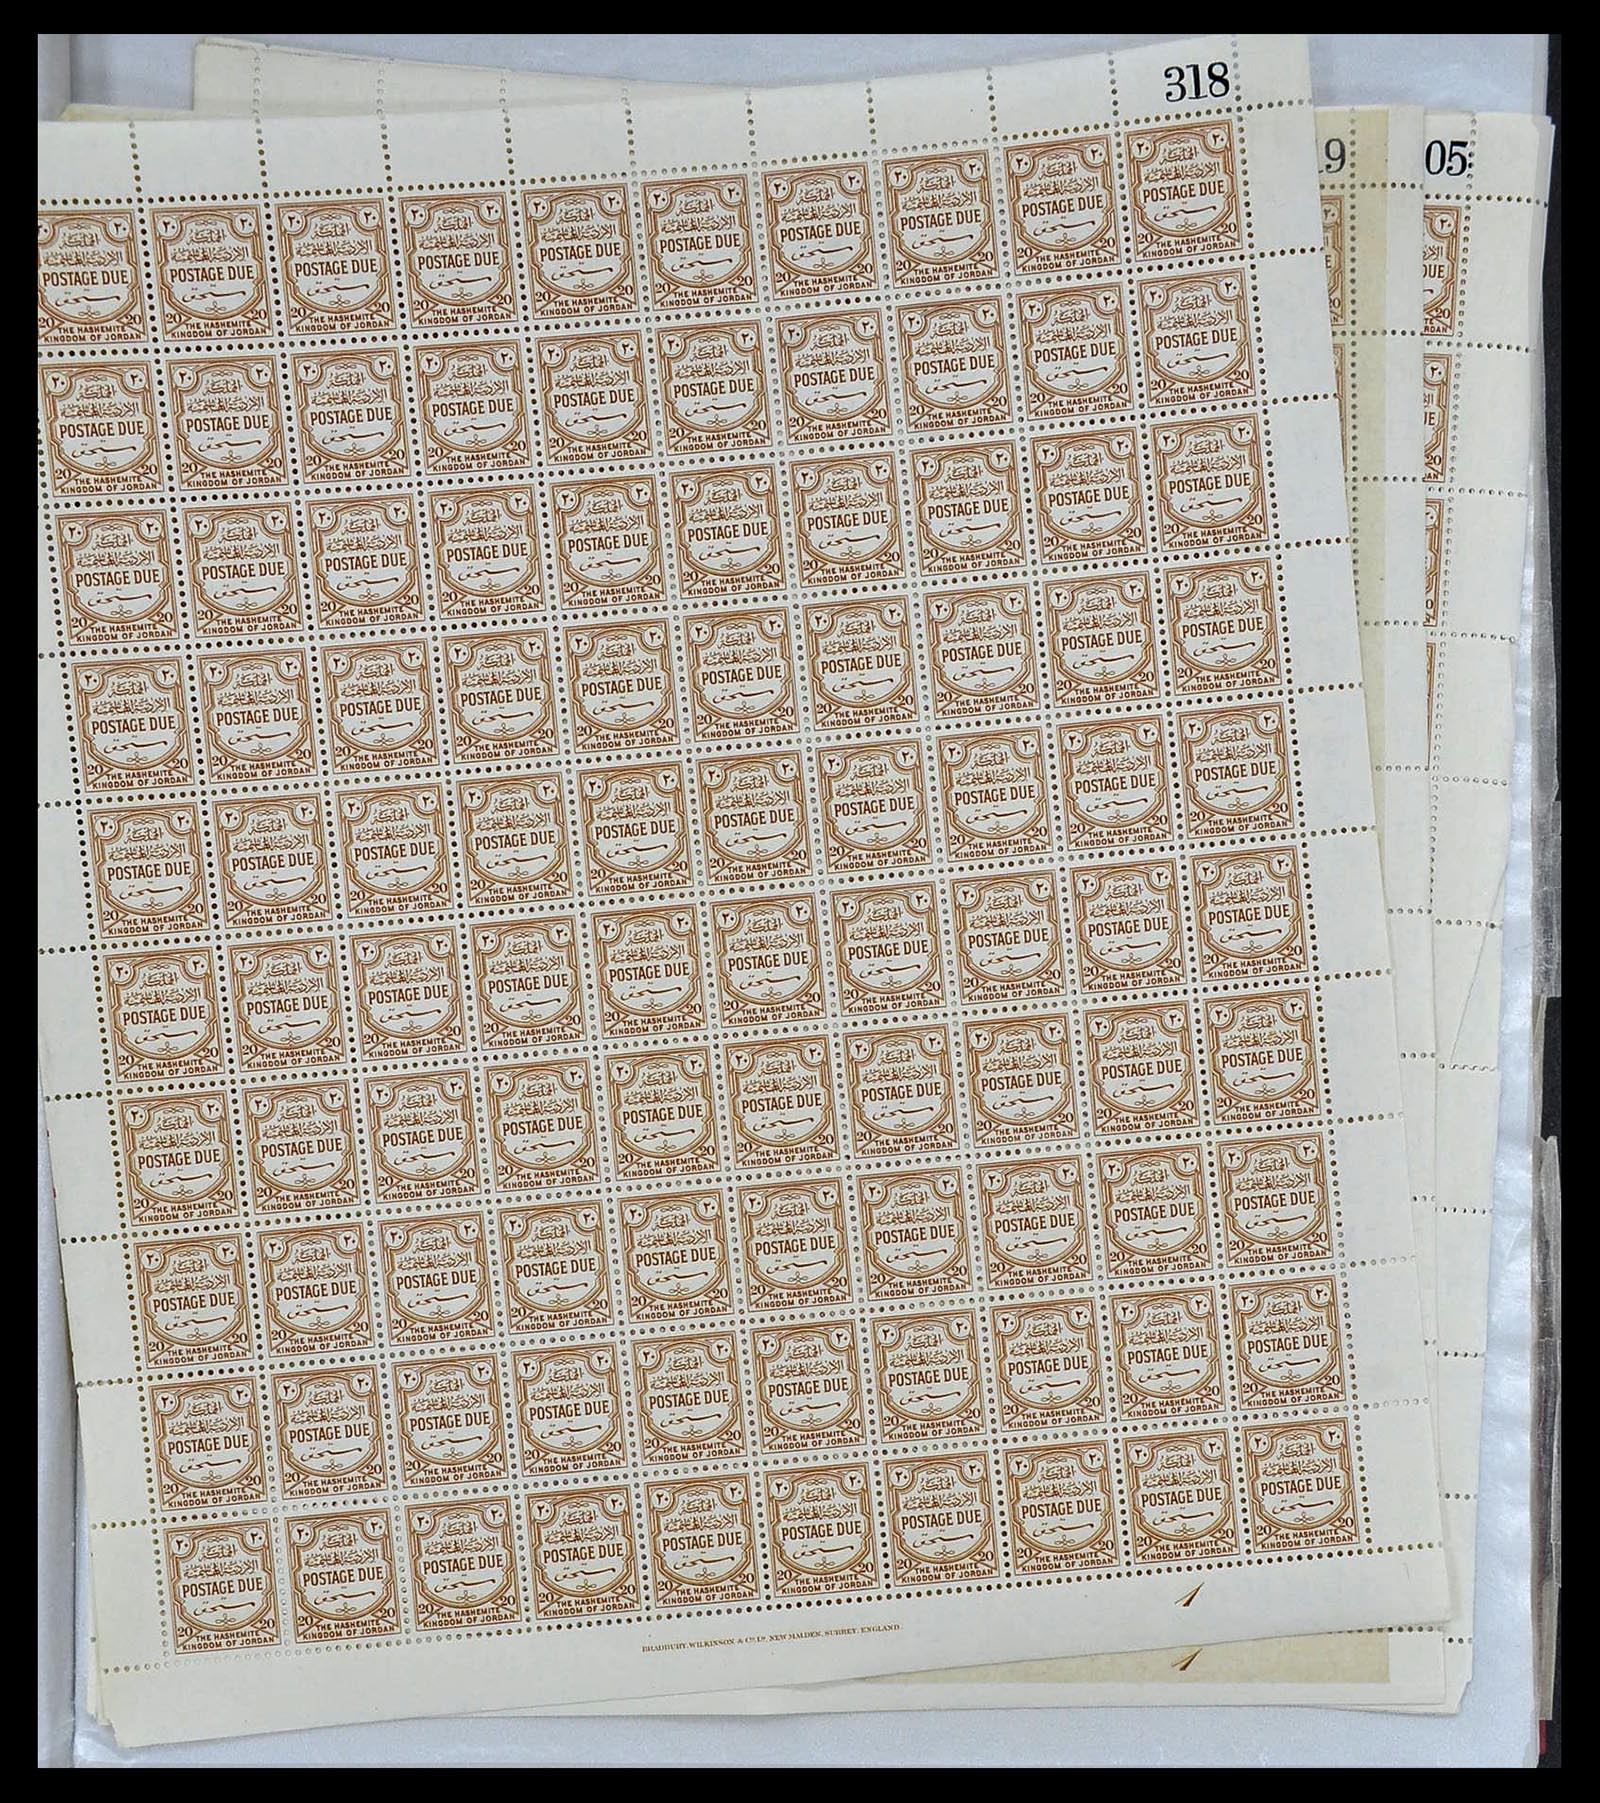 34126 006 - Stamp collection 34126 Jordan postage dues 1952-1957.